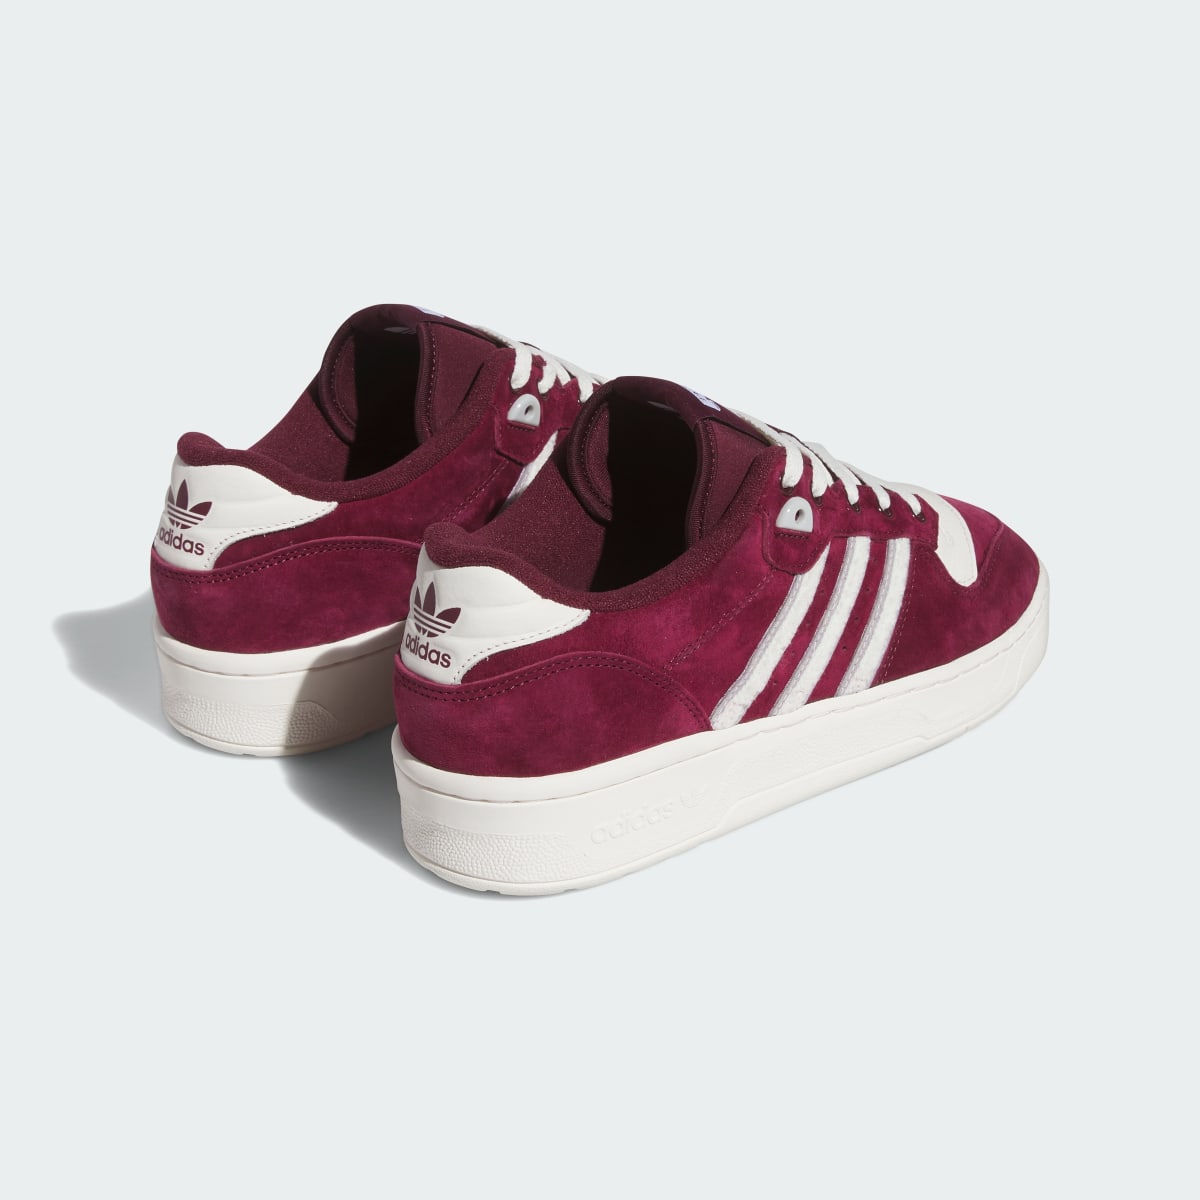 Adidas Texas A&M Rivalry Low Shoes. 6